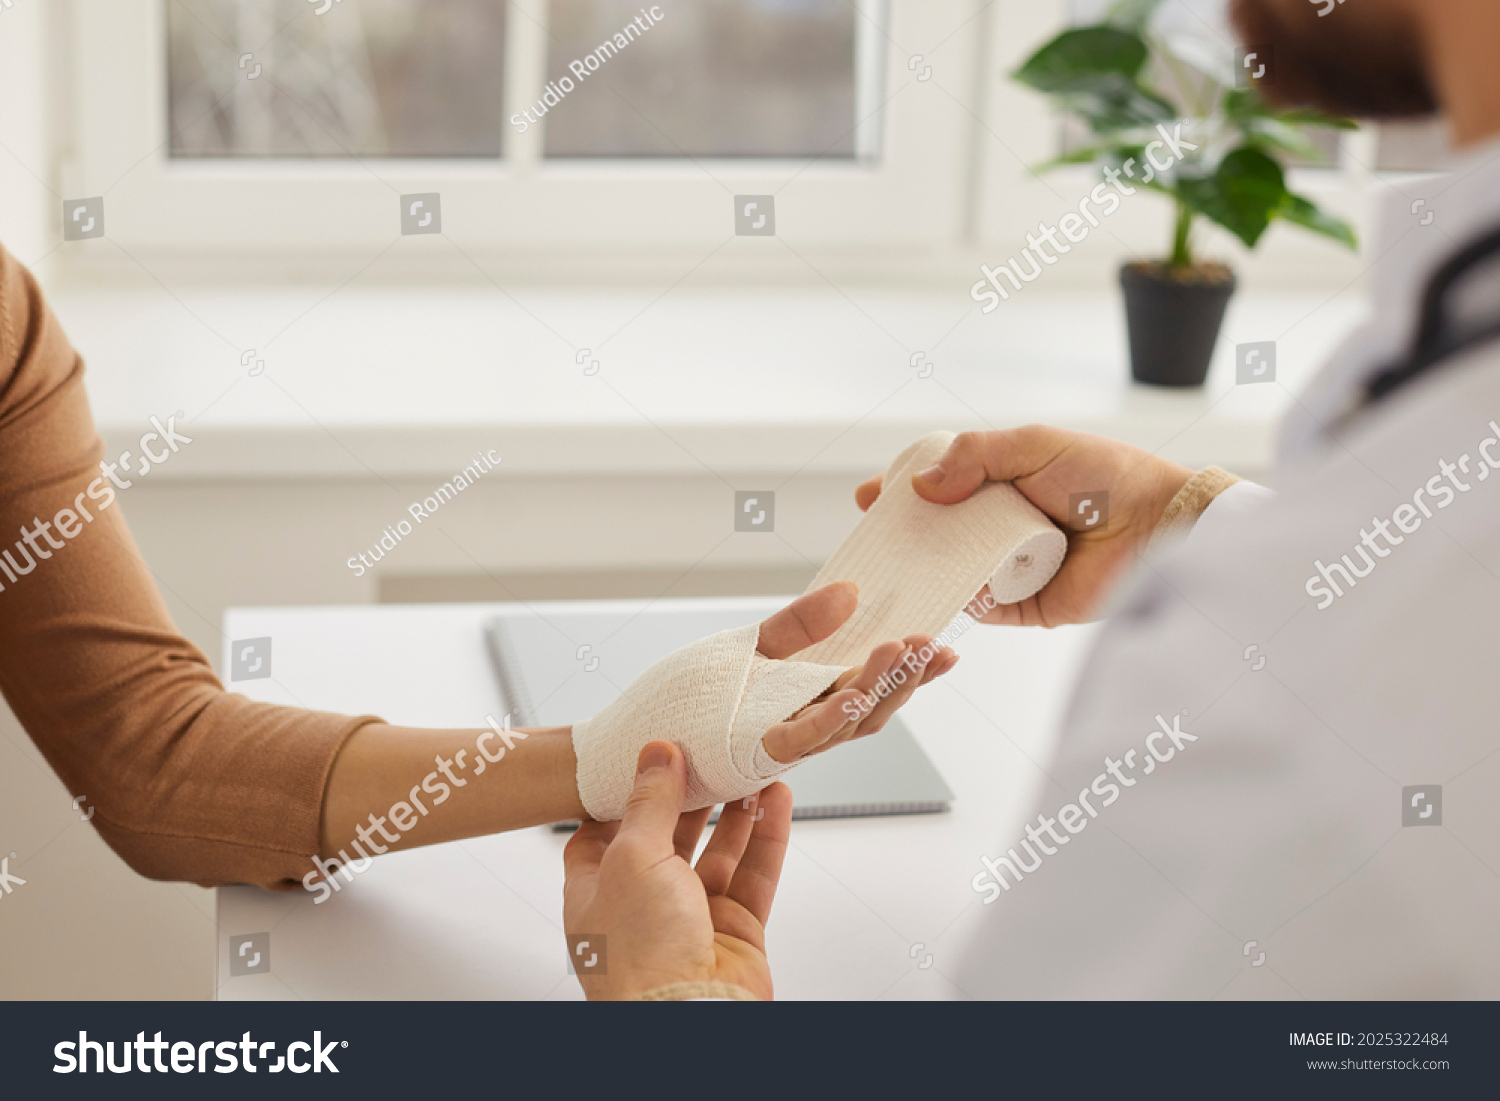 Doctor wrapping young woman's injured hand, close up. Doctor or nurse at modern medical office wrapping patient's sprained wrist with bandage. First aid and professional limb injury treatment concept #2025322484